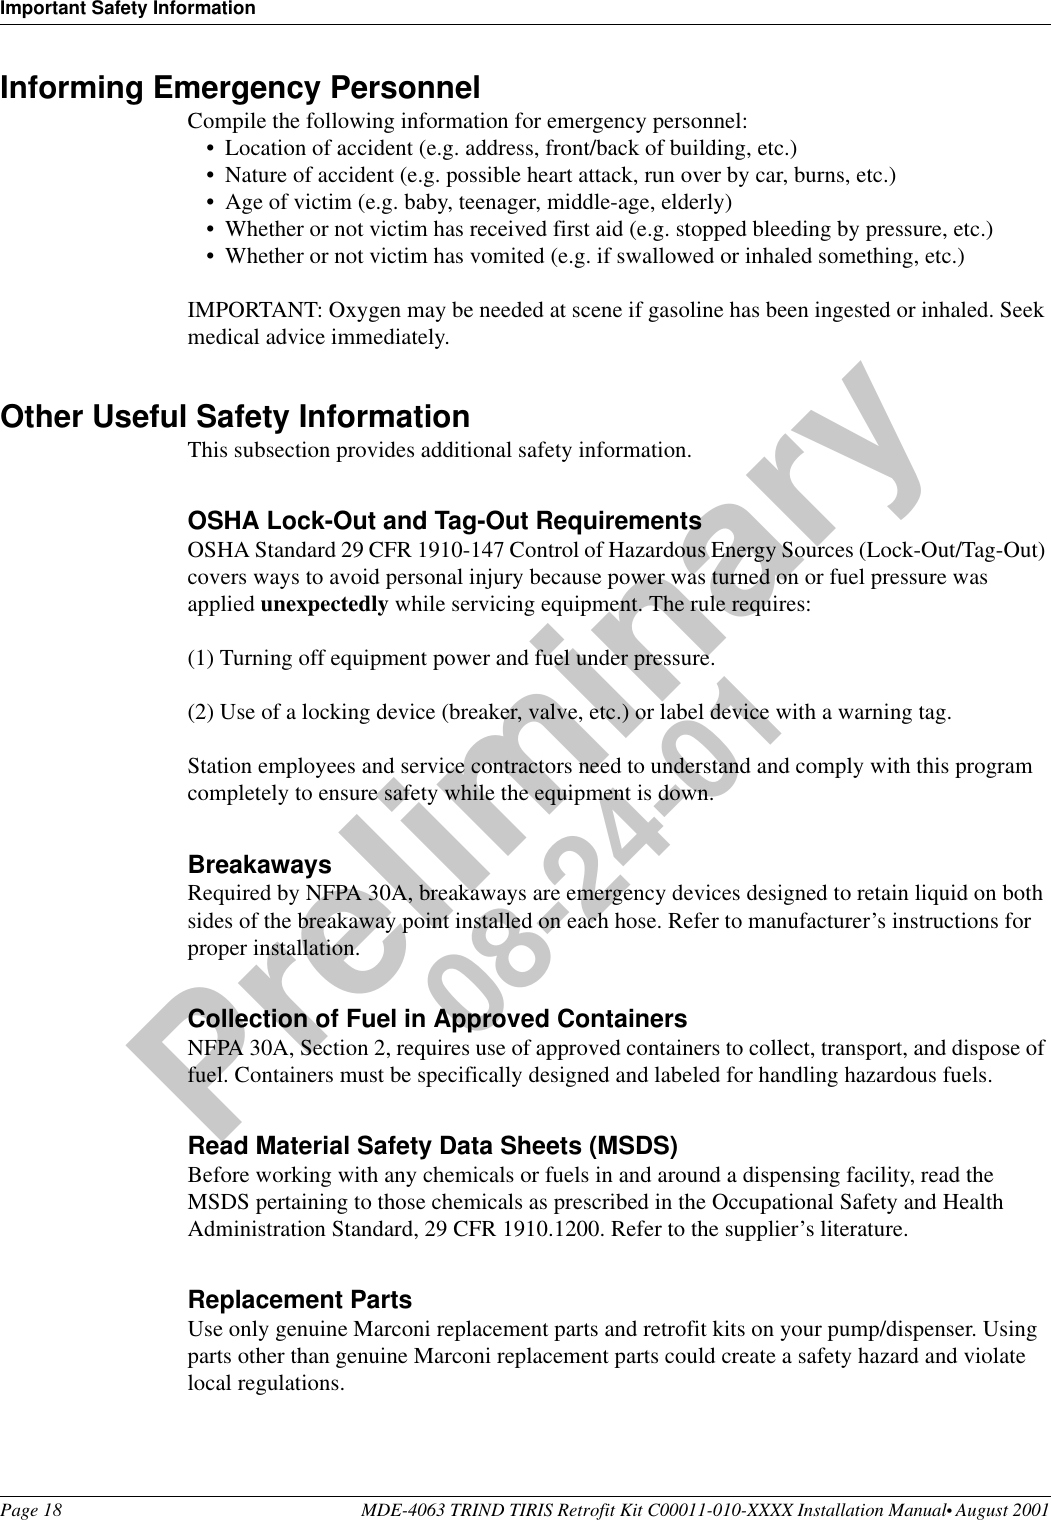 Important Safety InformationPage 18 MDE-4063 TRIND TIRIS Retrofit Kit C00011-010-XXXX Installation Manual• August 2001Preliminary08-24-01Informing Emergency PersonnelCompile the following information for emergency personnel:•Location of accident (e.g. address, front/back of building, etc.)•Nature of accident (e.g. possible heart attack, run over by car, burns, etc.)•Age of victim (e.g. baby, teenager, middle-age, elderly)•Whether or not victim has received first aid (e.g. stopped bleeding by pressure, etc.)•Whether or not victim has vomited (e.g. if swallowed or inhaled something, etc.)IMPORTANT: Oxygen may be needed at scene if gasoline has been ingested or inhaled. Seek medical advice immediately.Other Useful Safety InformationThis subsection provides additional safety information.OSHA Lock-Out and Tag-Out RequirementsOSHA Standard 29 CFR 1910-147 Control of Hazardous Energy Sources (Lock-Out/Tag-Out) covers ways to avoid personal injury because power was turned on or fuel pressure was applied unexpectedly while servicing equipment. The rule requires: (1) Turning off equipment power and fuel under pressure.(2) Use of a locking device (breaker, valve, etc.) or label device with a warning tag.Station employees and service contractors need to understand and comply with this program completely to ensure safety while the equipment is down.BreakawaysRequired by NFPA 30A, breakaways are emergency devices designed to retain liquid on both sides of the breakaway point installed on each hose. Refer to manufacturer’s instructions for proper installation.Collection of Fuel in Approved ContainersNFPA 30A, Section 2, requires use of approved containers to collect, transport, and dispose of fuel. Containers must be specifically designed and labeled for handling hazardous fuels.Read Material Safety Data Sheets (MSDS)Before working with any chemicals or fuels in and around a dispensing facility, read the MSDS pertaining to those chemicals as prescribed in the Occupational Safety and Health Administration Standard, 29 CFR 1910.1200. Refer to the supplier’s literature.Replacement PartsUse only genuine Marconi replacement parts and retrofit kits on your pump/dispenser. Using parts other than genuine Marconi replacement parts could create a safety hazard and violate local regulations.